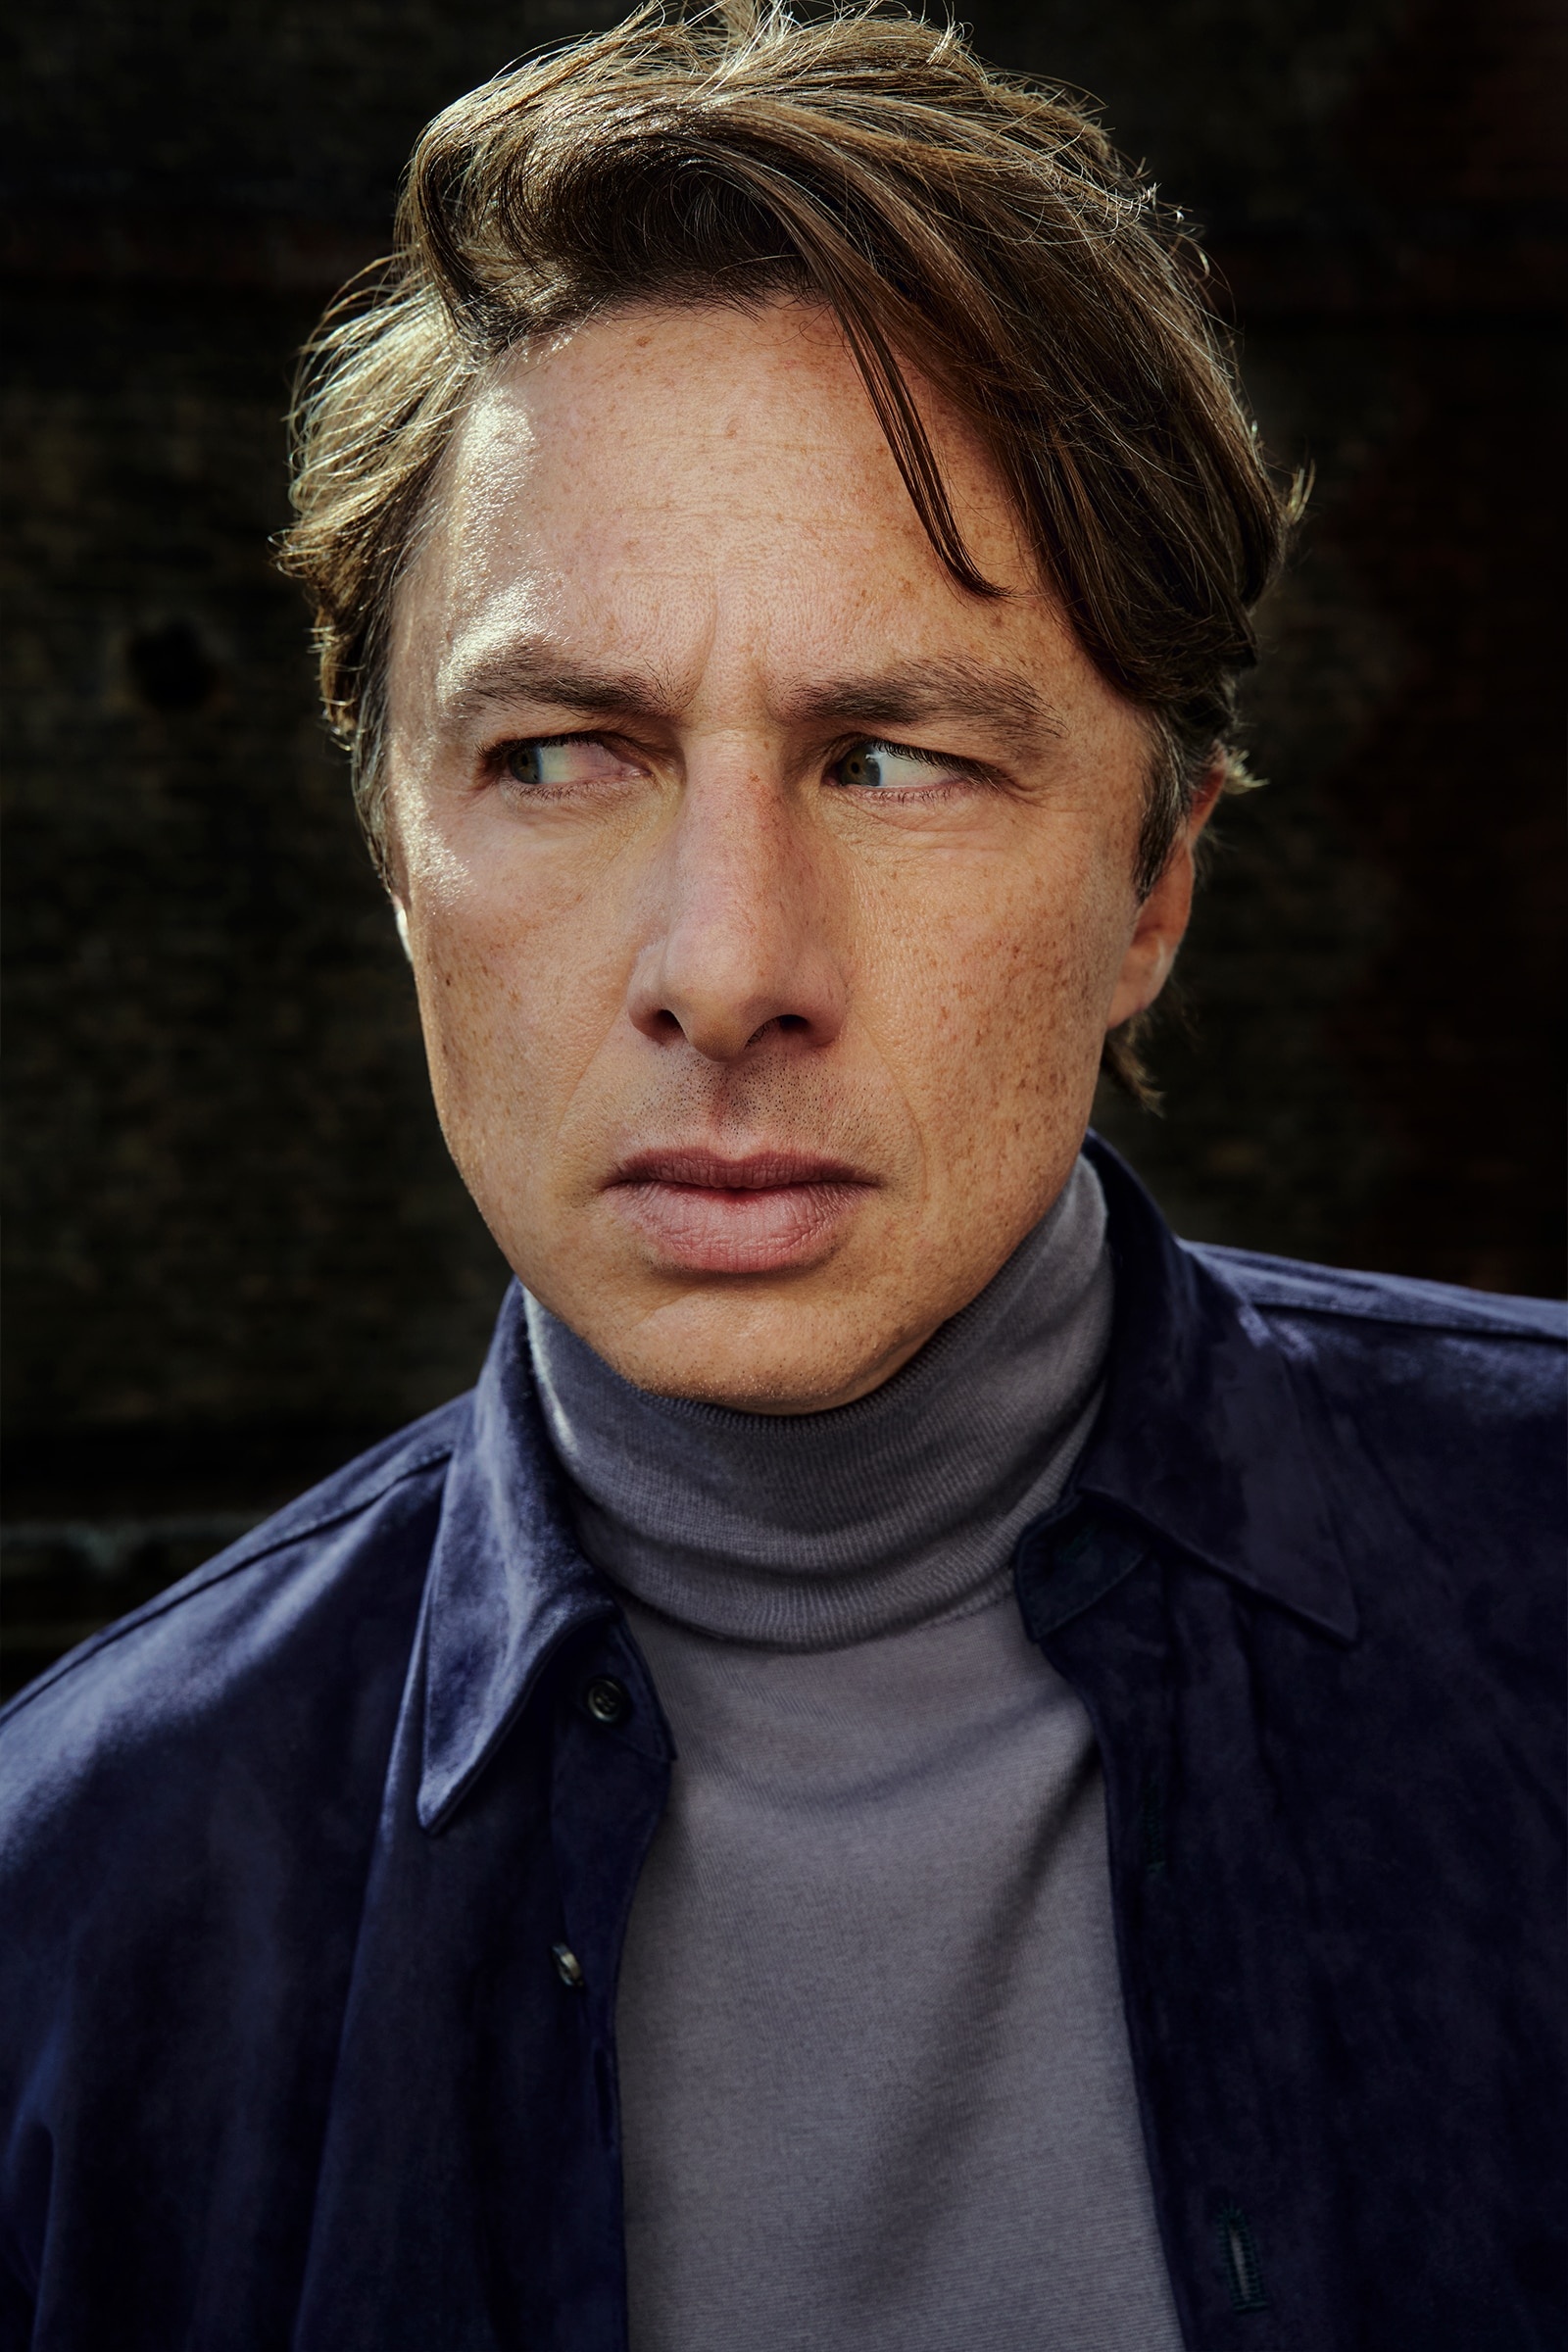 Zach Braff: An American actor who appeared on stage in All New People in which he starred and wrote the screenplay. 1600x2400 HD Background.